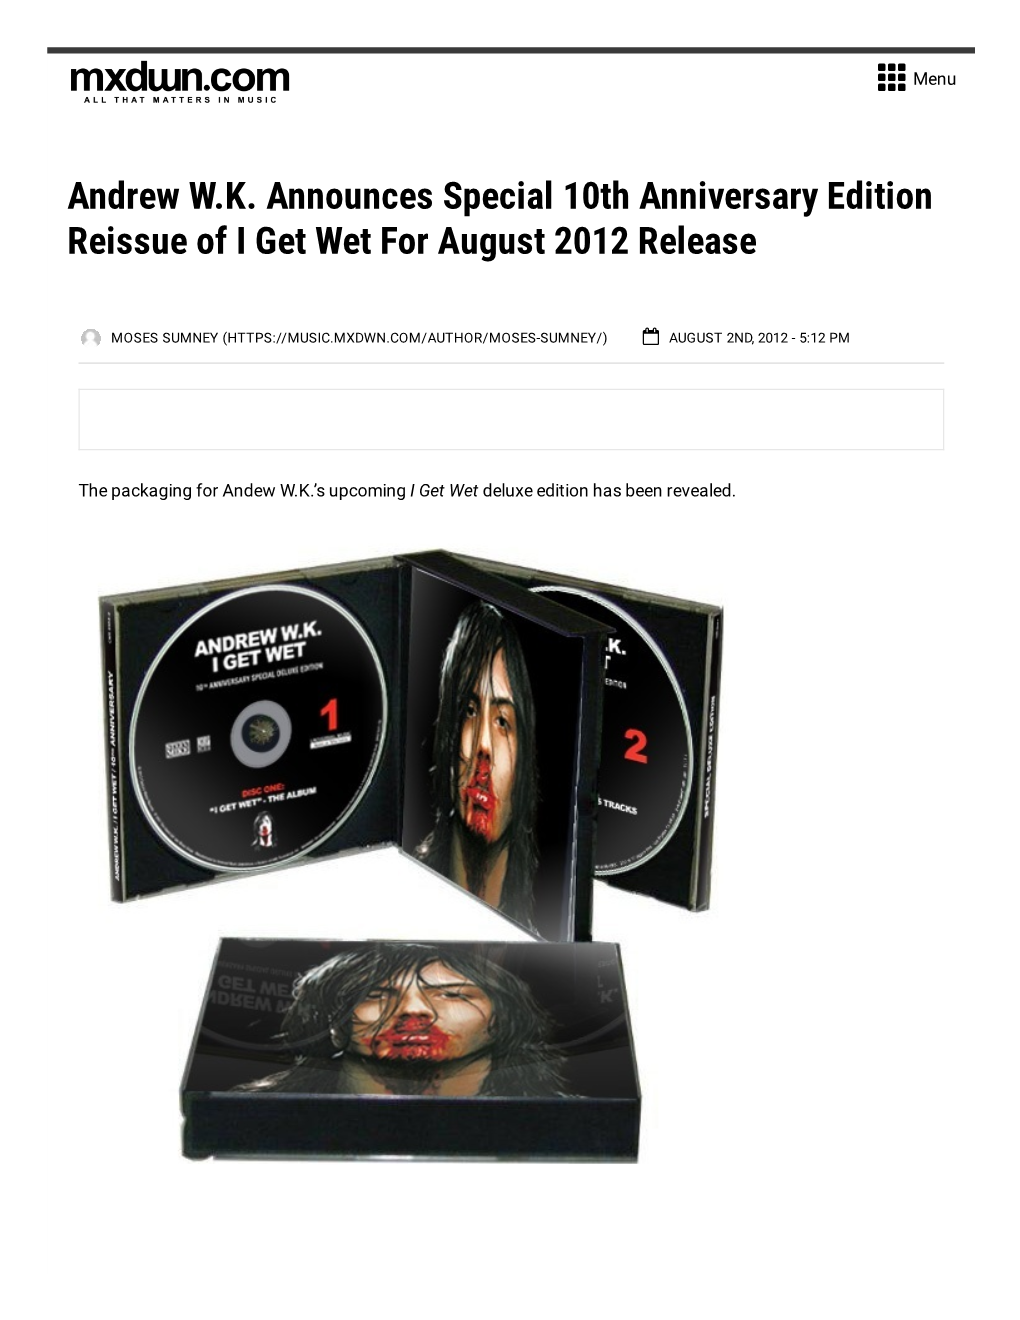 Andrew W.K. Announces Special 10Th Anniversary Edition Reissue of I Get Wet for August 2012 Release